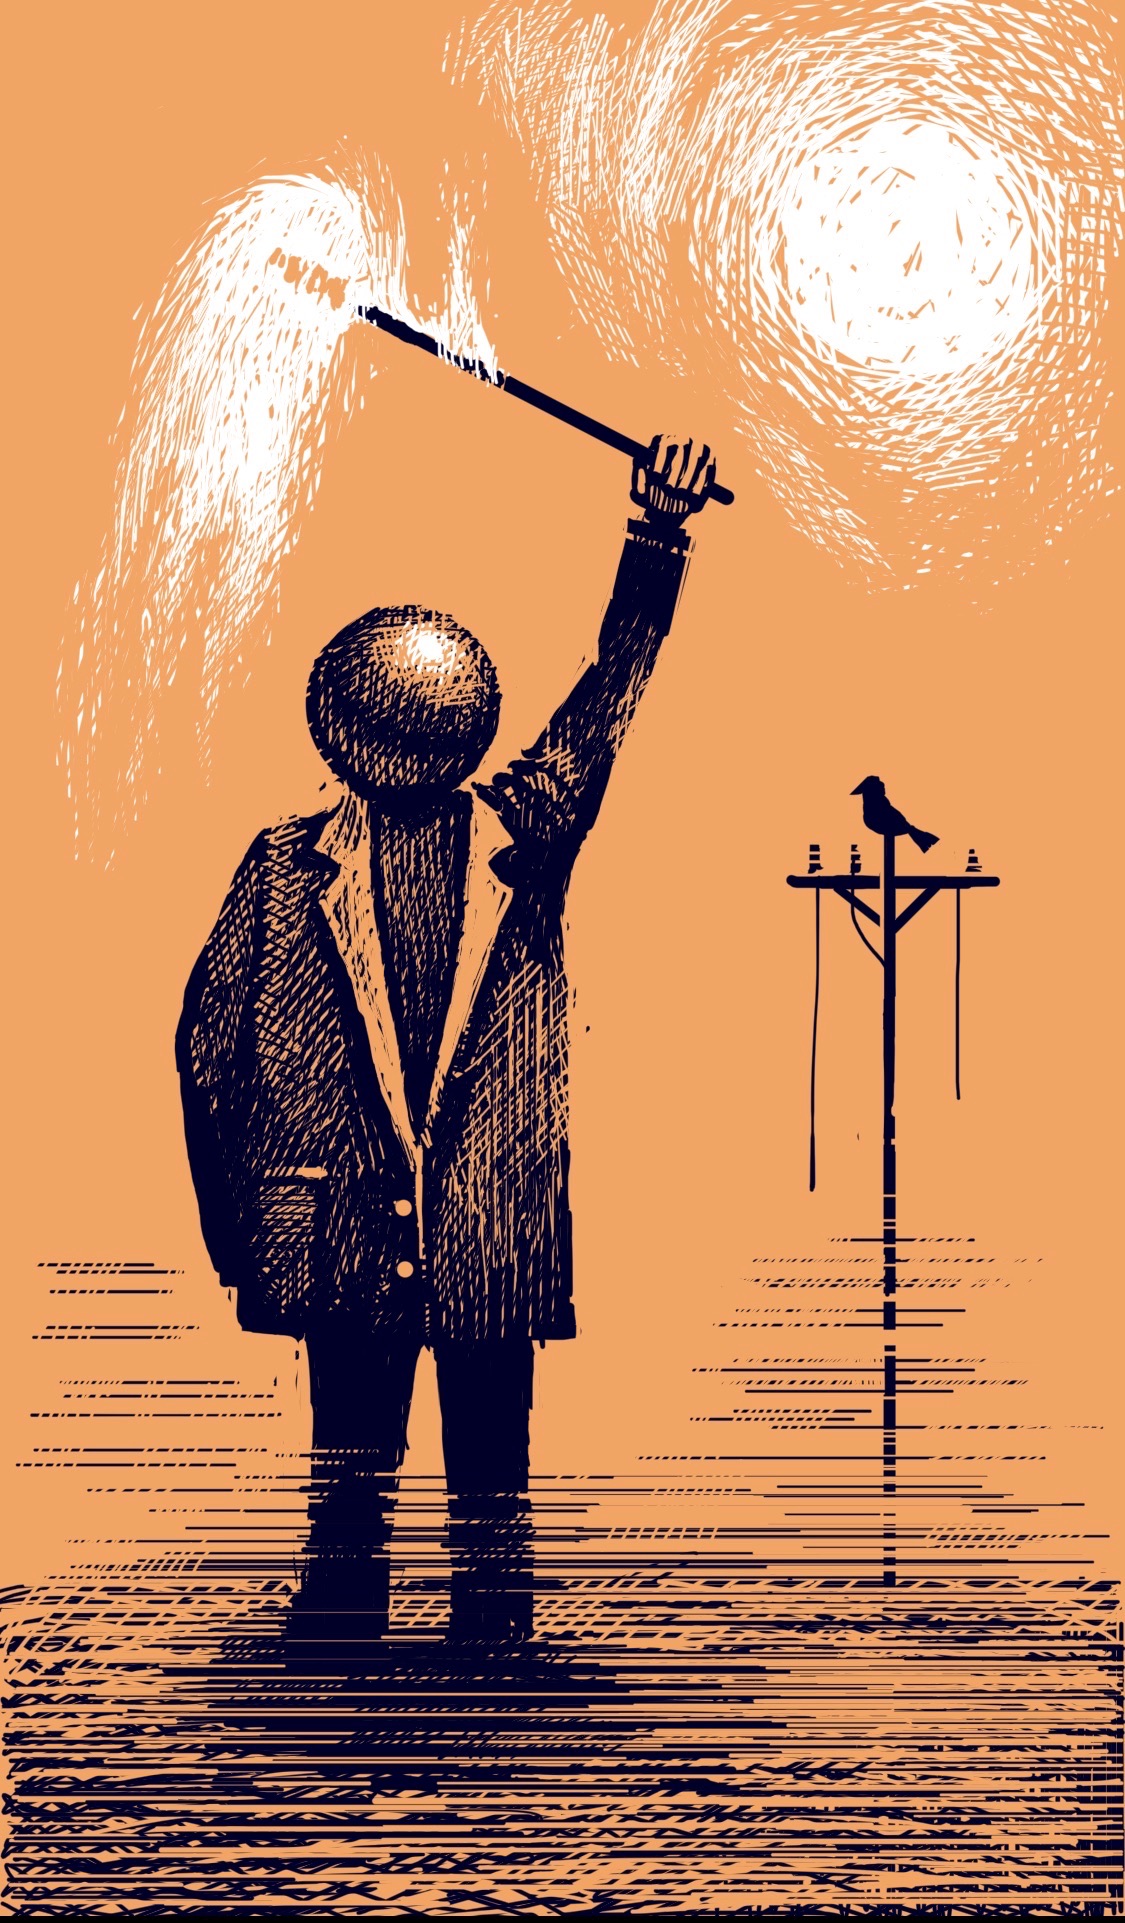 A person with a sphere for a head holds up a torch in a surreal desertlike envronment